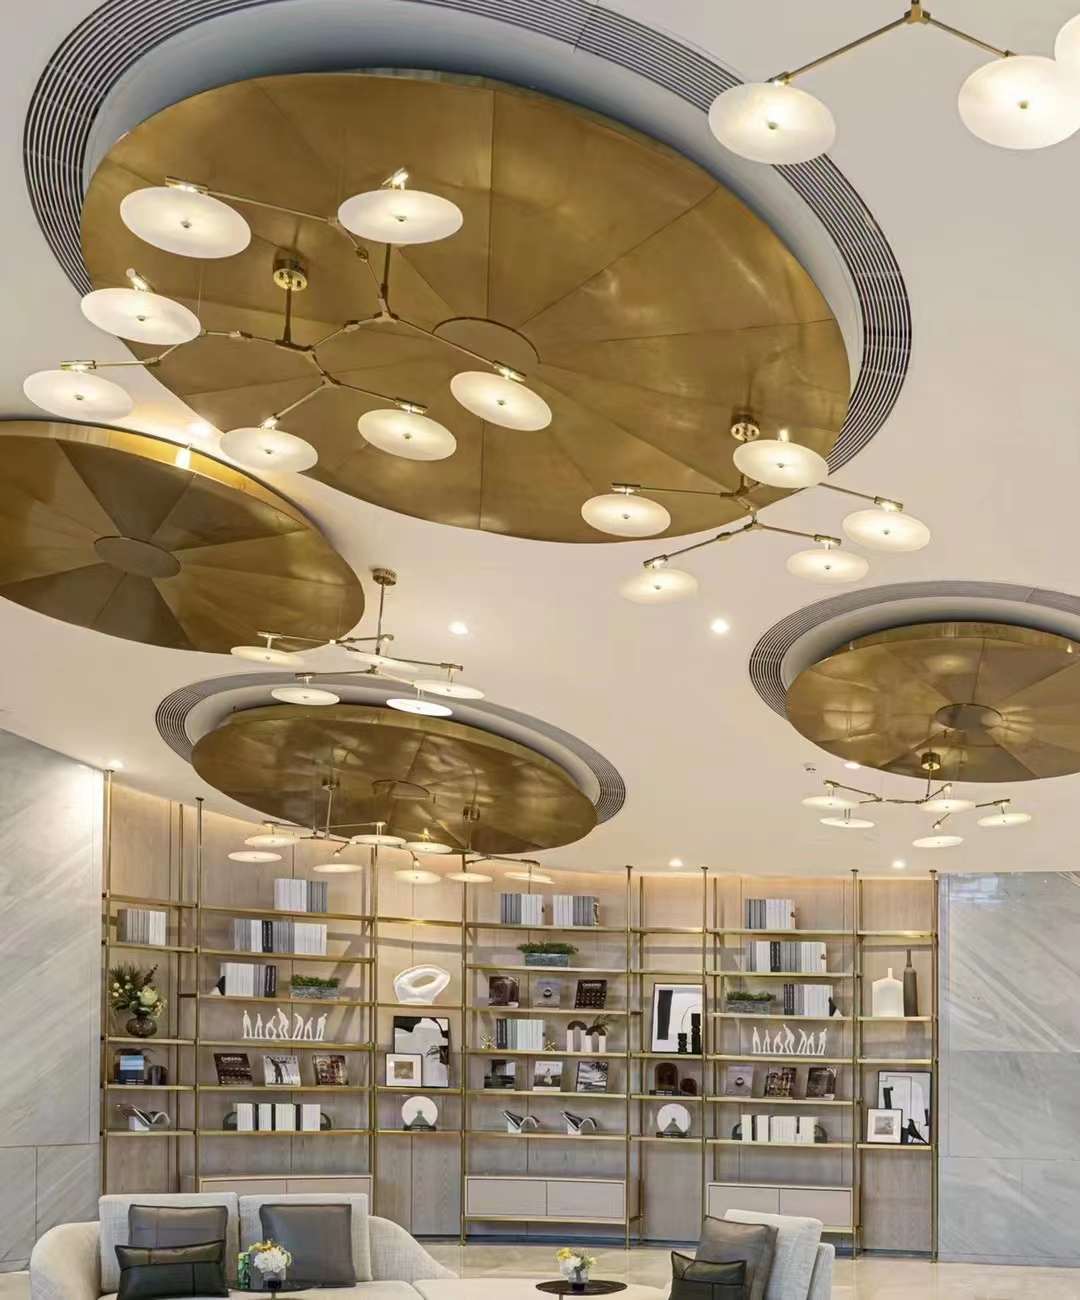 Metal screen panels wine cabinet ceiling features gold mirror finish